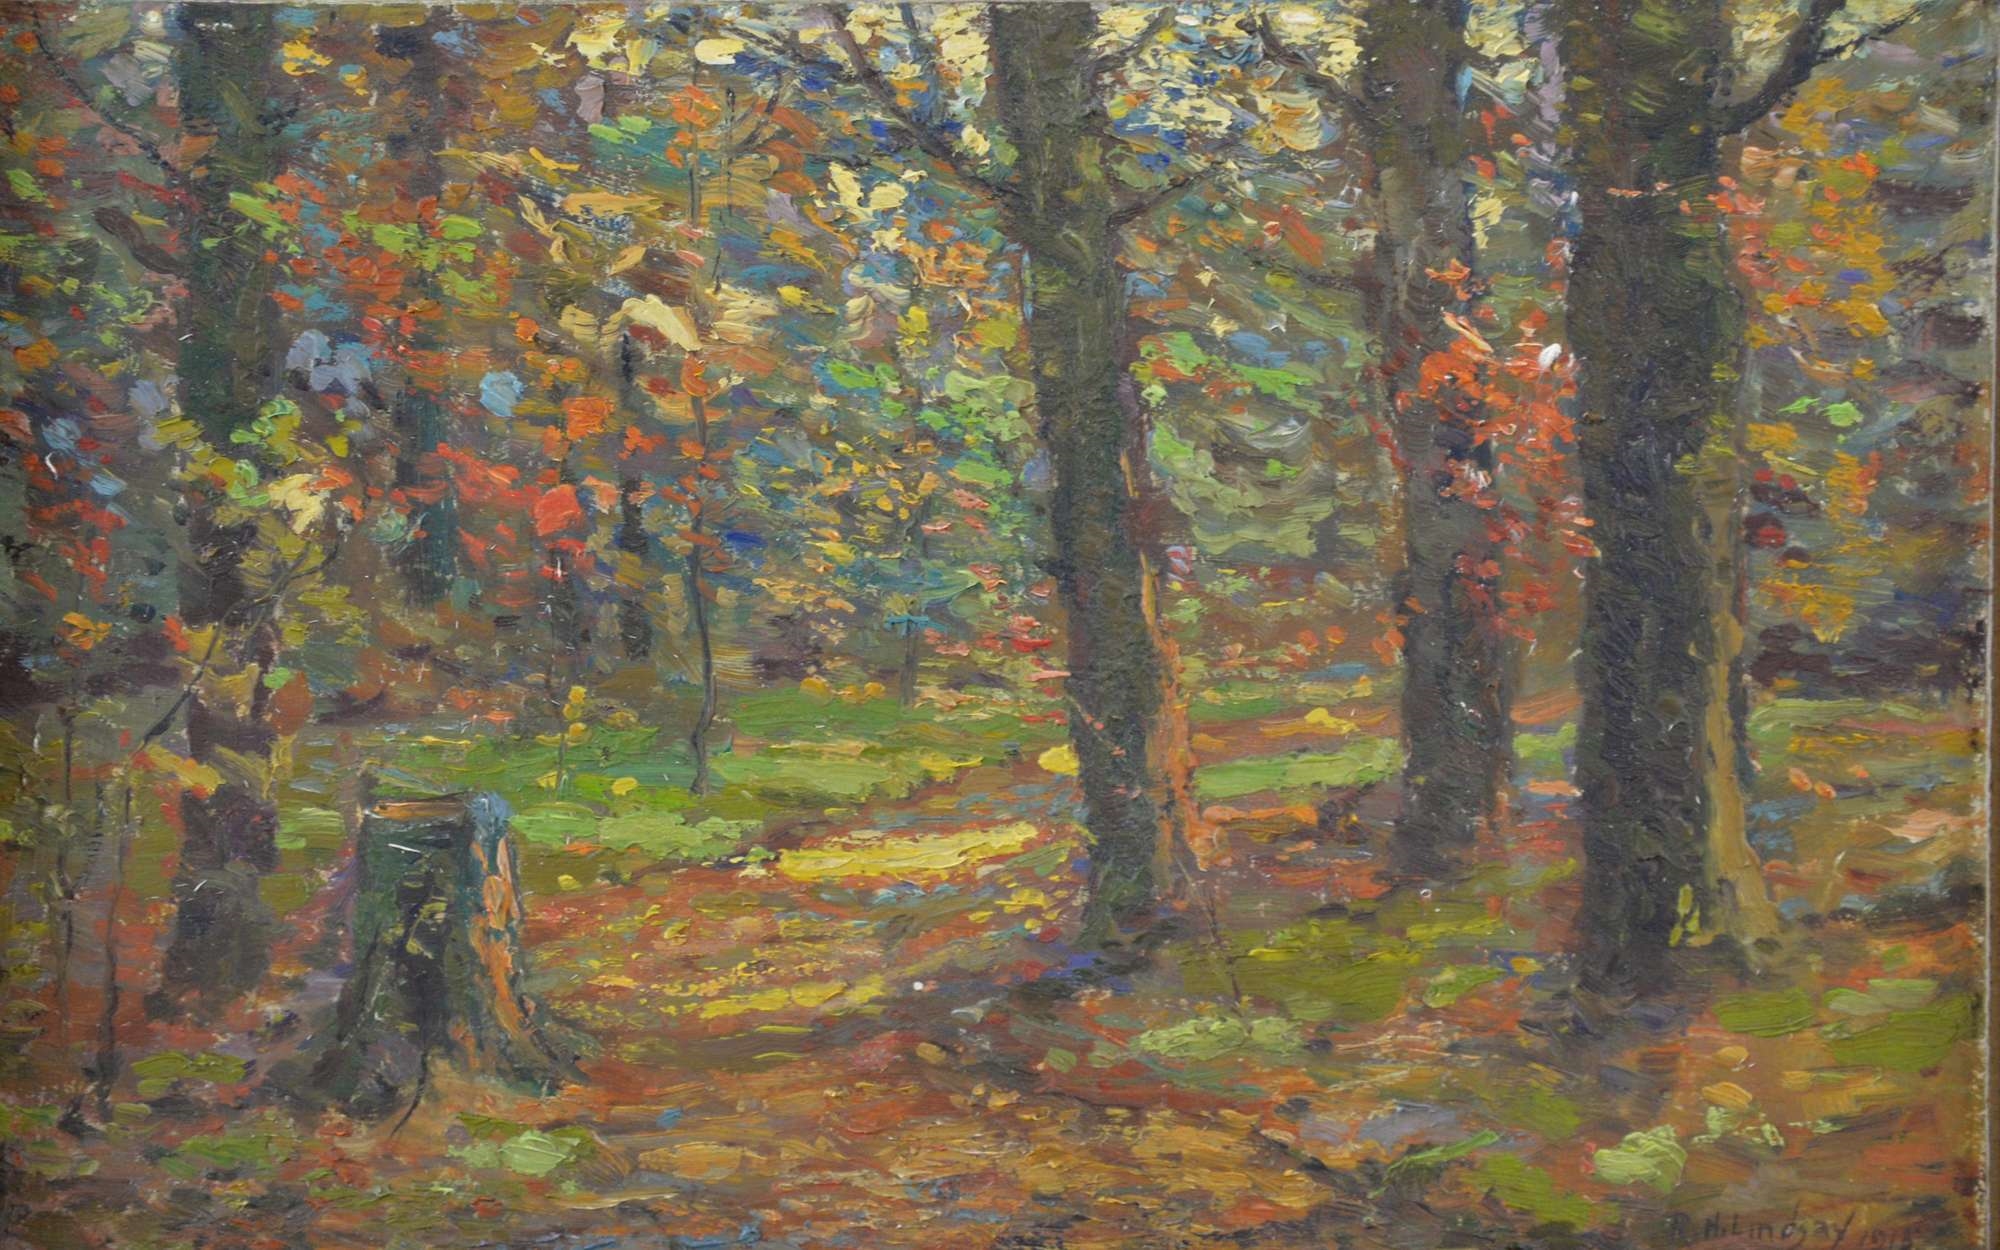 Artwork by Robert Henry Lindsay, Autumn, Made of Oil on board.